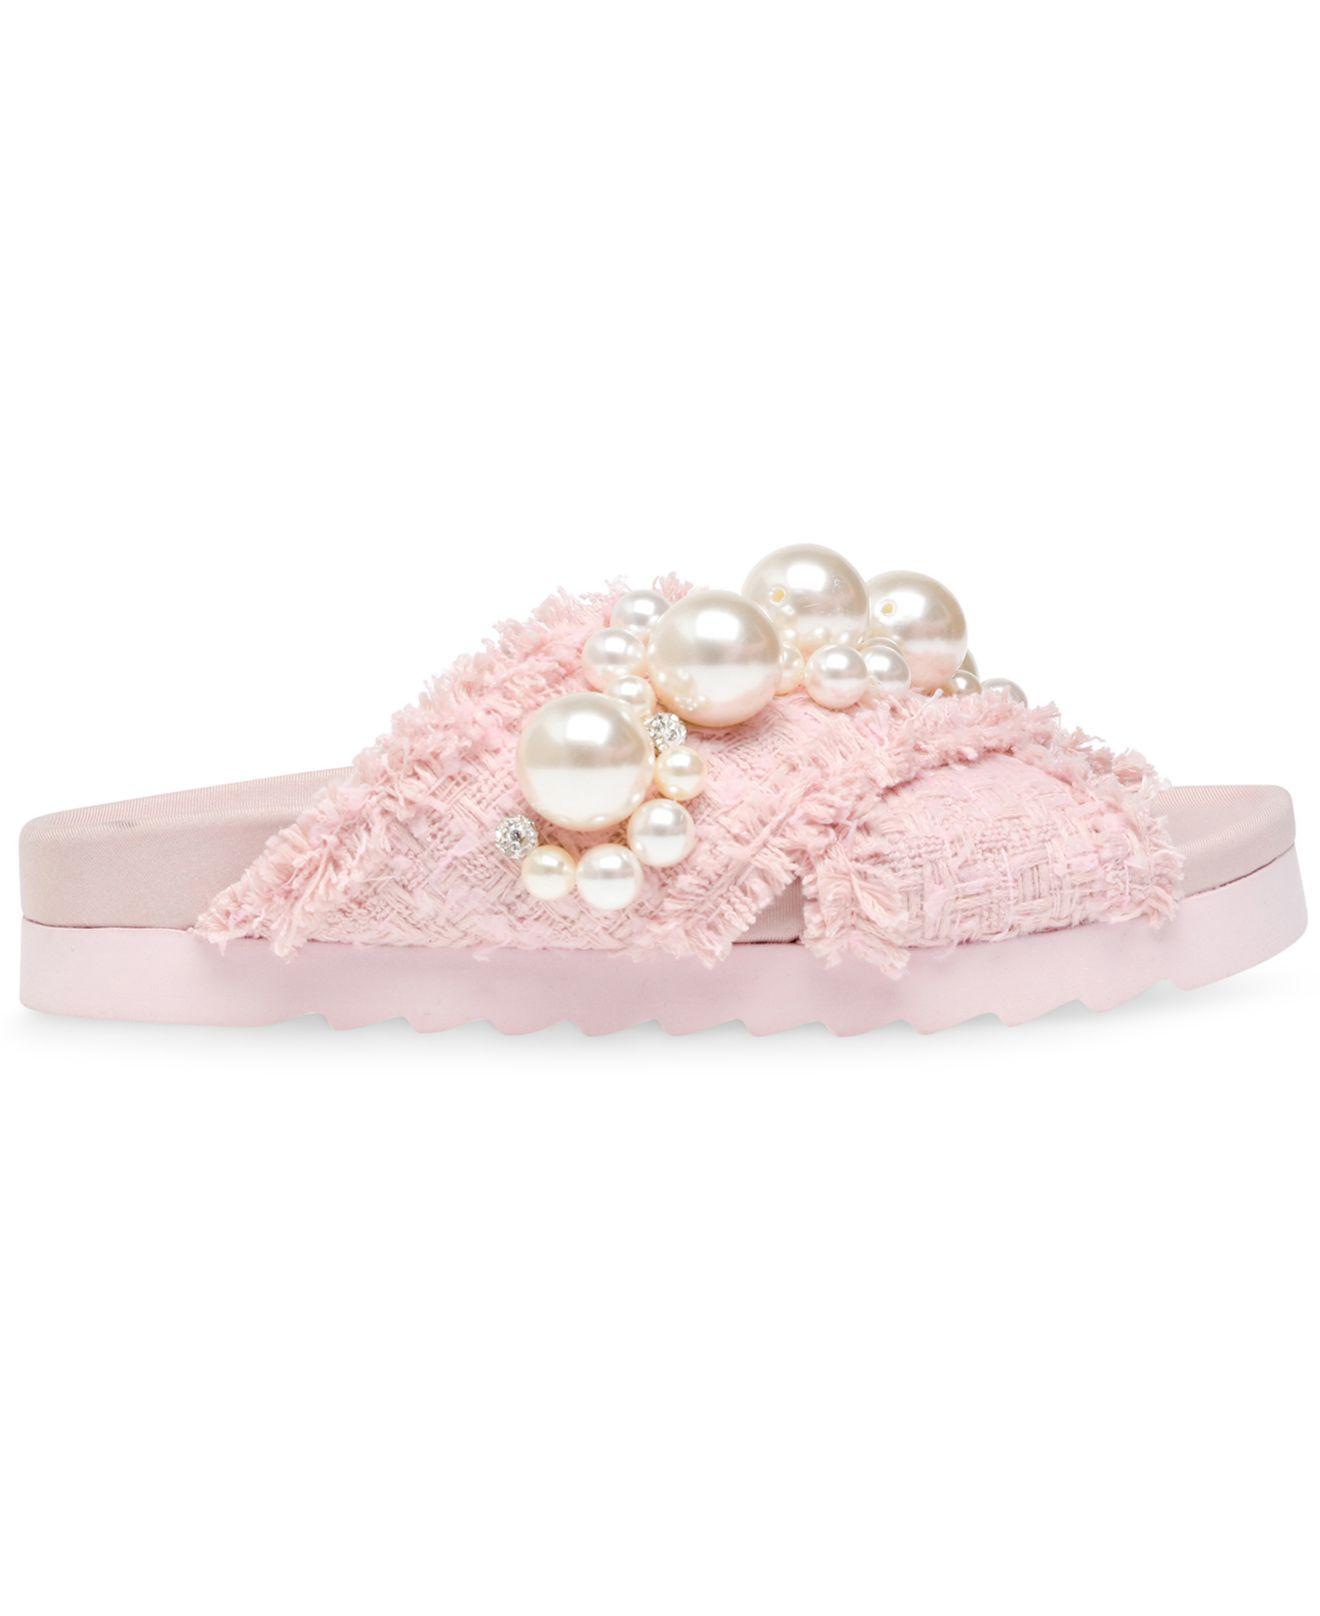 Steve Madden Amie Pearl Boucle Footbed Sandals in Pink | Lyst